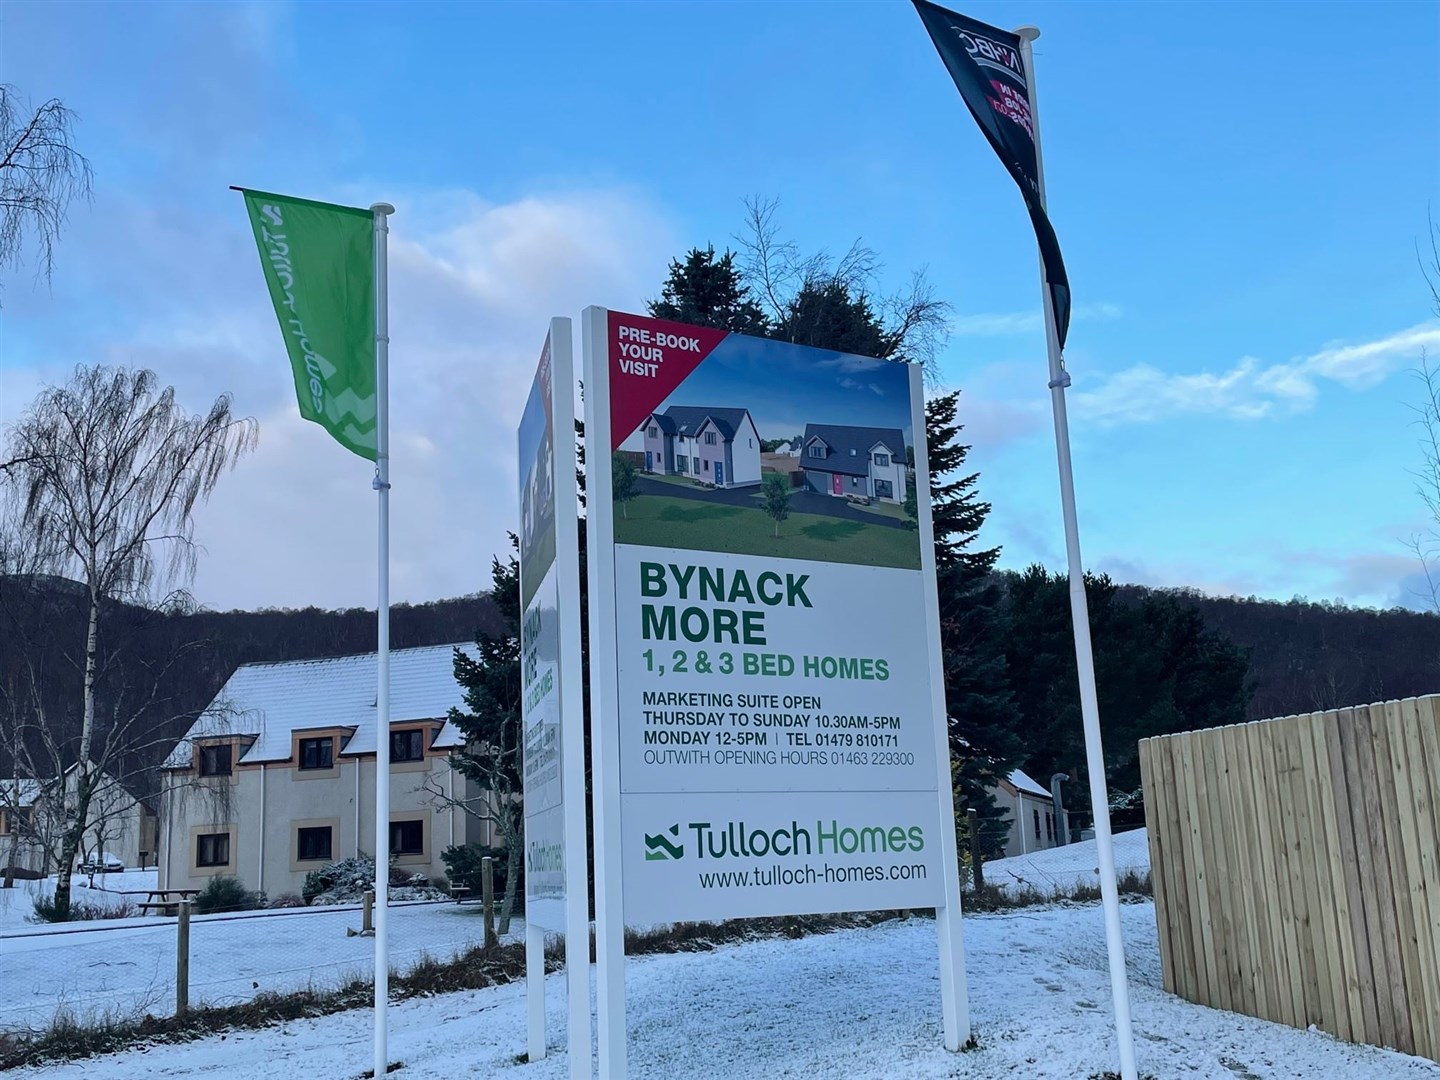 Advertising for the Bynack More private housing development currently taking shape near the centre of Aviemore.